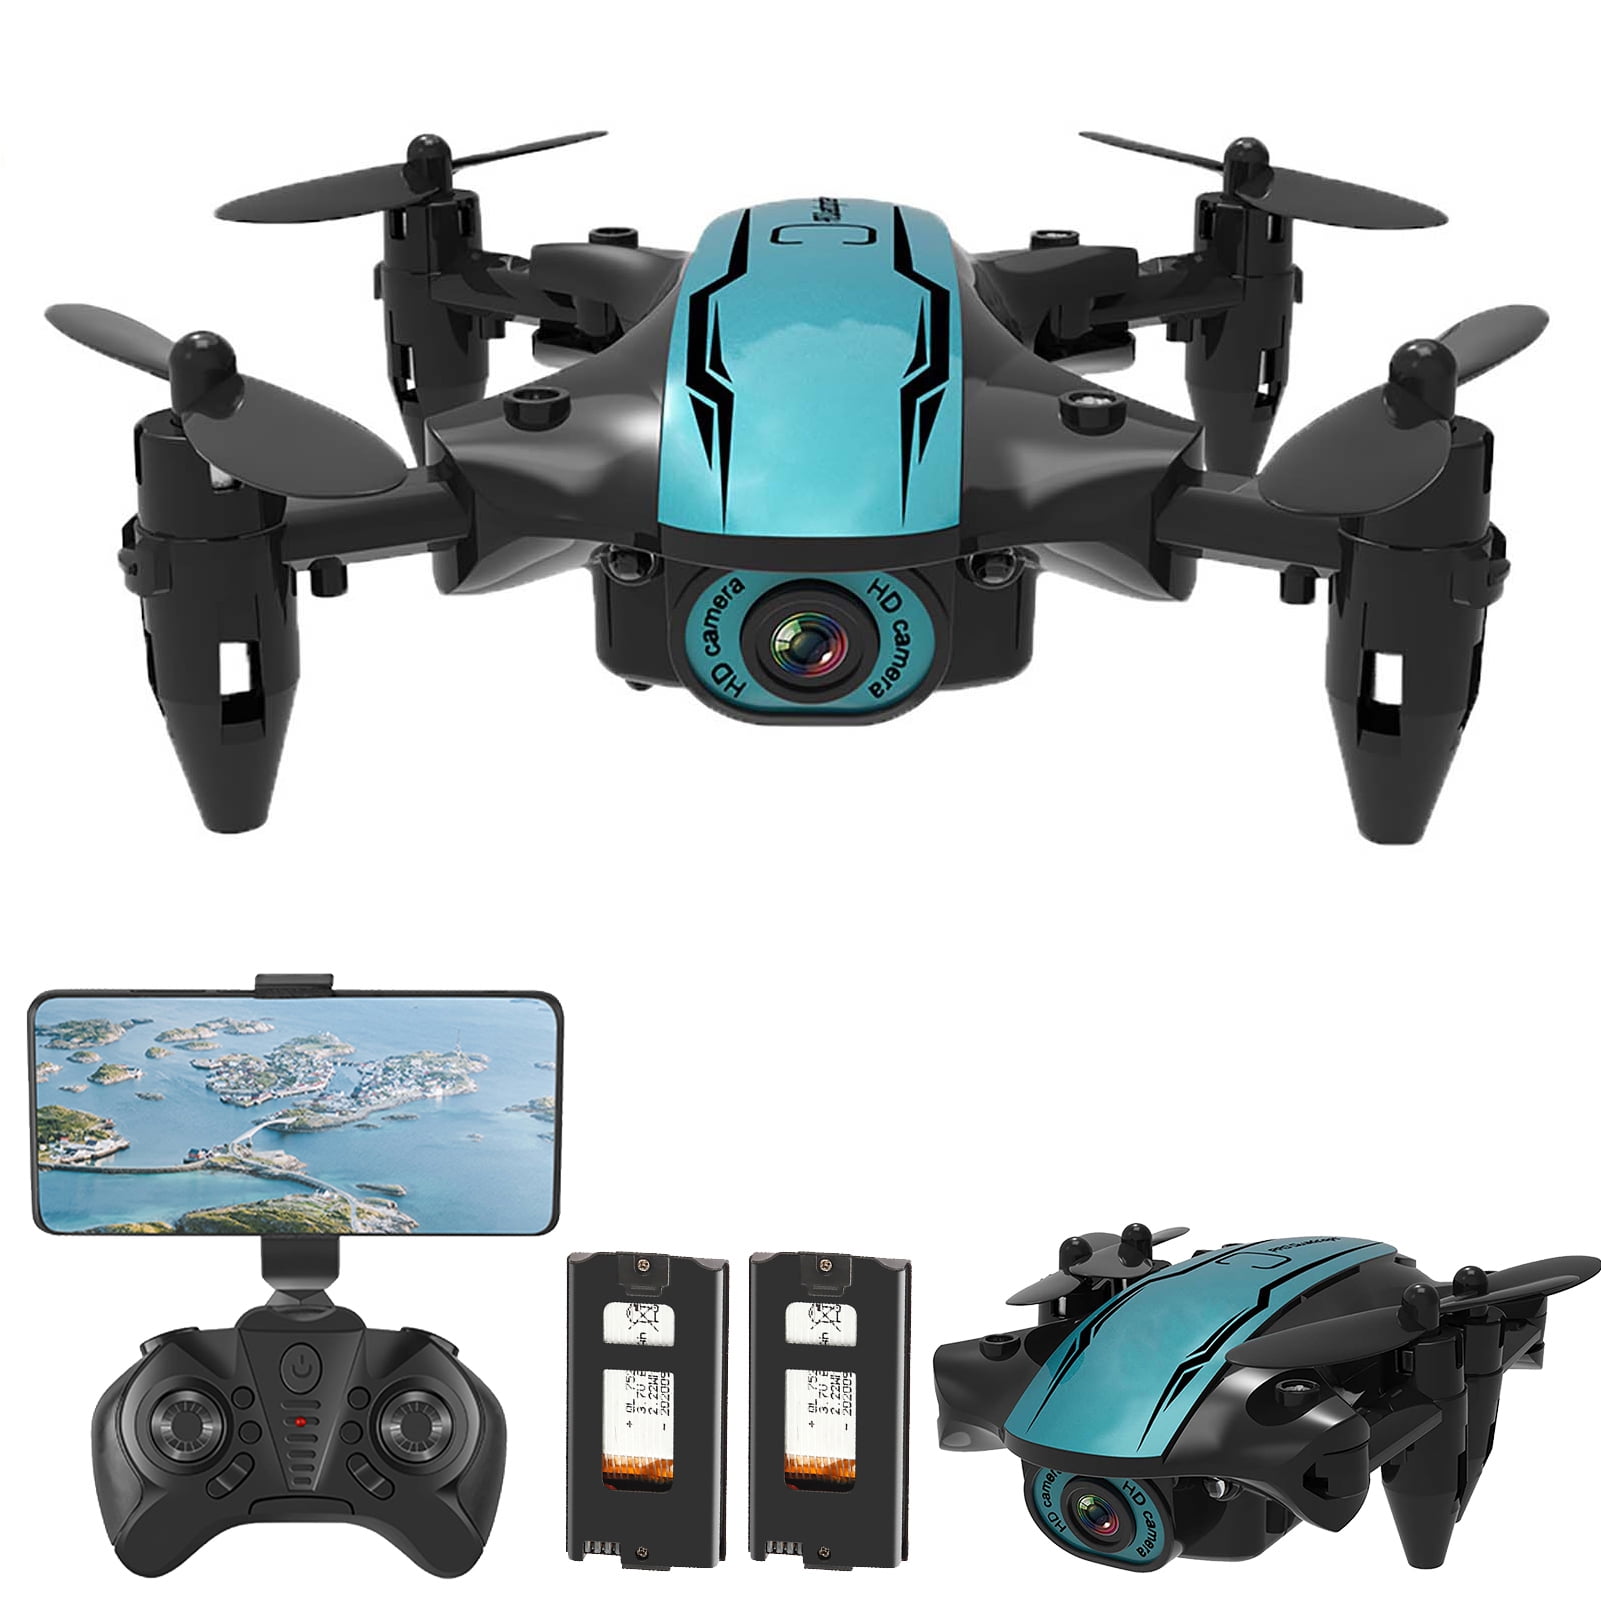 Fistone RC Drone WIFI FPV Quad-rotor 2.4G 6-Axis Gyro Altitude Hold Helicopters